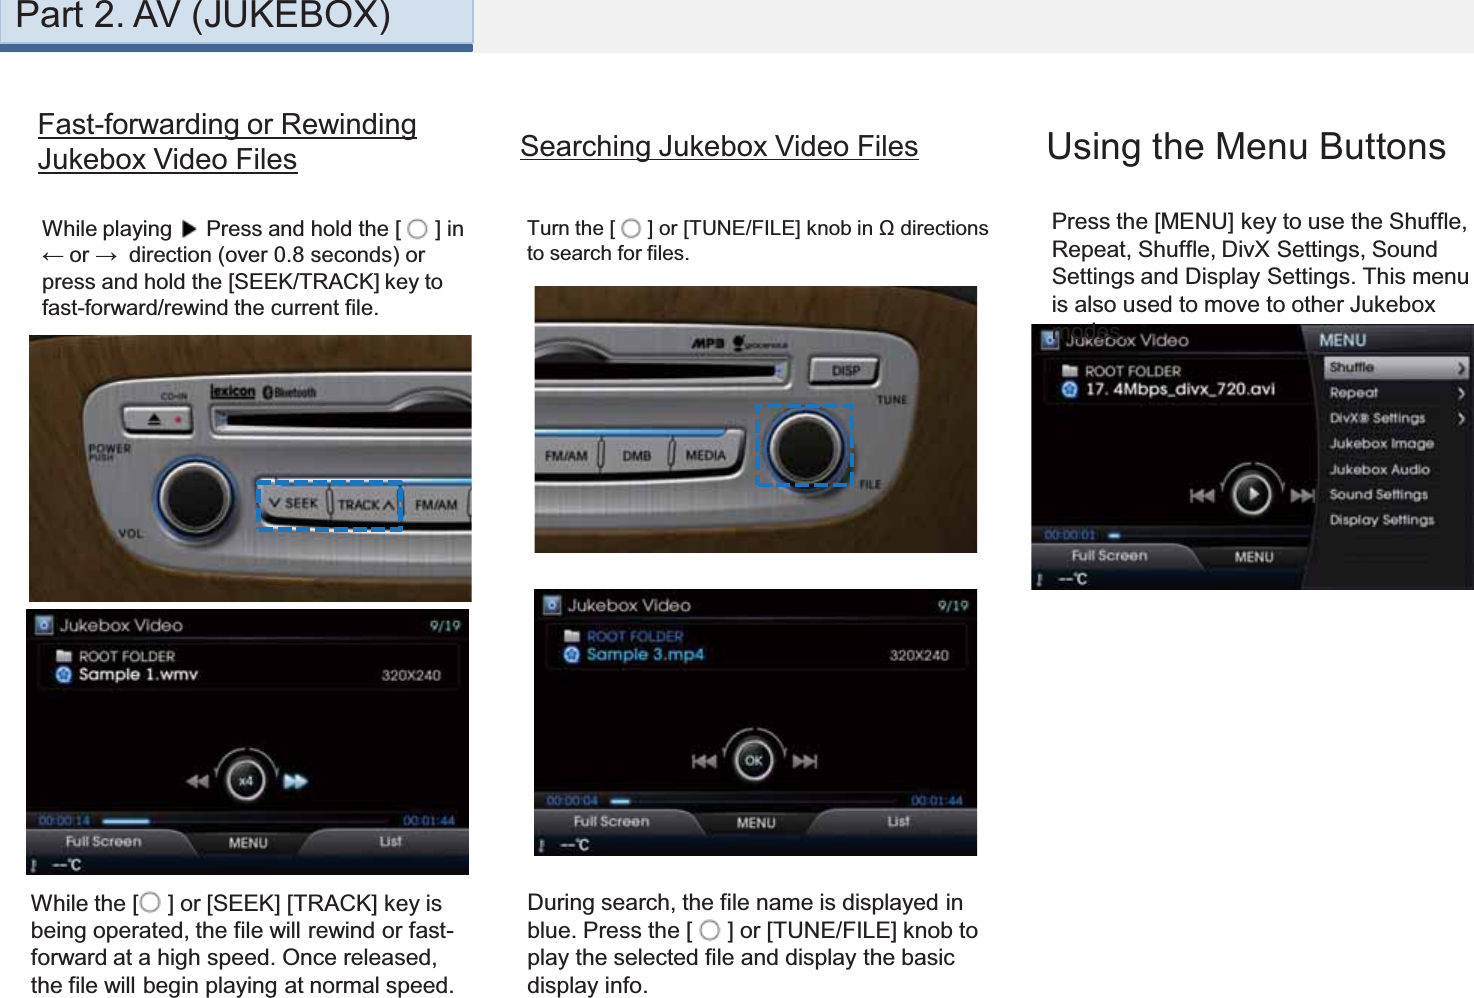 Part 2. AV (JUKEBOX)Fast-forwarding or Rewinding Jukebox Video Files Searching Jukebox Video FilesPress the [MENU] key to use the Shuffle, Repeat, Shuffle, DivX Settings, Sound Settings and Display Settings. This menu is also used to move to other Jukebox modes. Using the Menu ButtonsWhile playing  Press and hold the [  ] in ← or →  direction (over 0.8 seconds) or press and hold the [SEEK/TRACK] key to fast-forward/rewind the current file.While the [ ] or [SEEK] [TRACK] key is being operated, the file will rewind or fast-forward at a high speed. Once released, the file will begin playing at normal speed.During search, the file name is displayed in blue. Press the [  ] or [TUNE/FILE] knob to play the selected file and display the basic display info. Turn the [  ] or [TUNE/FILE] knob in Ω directions to search for files. 